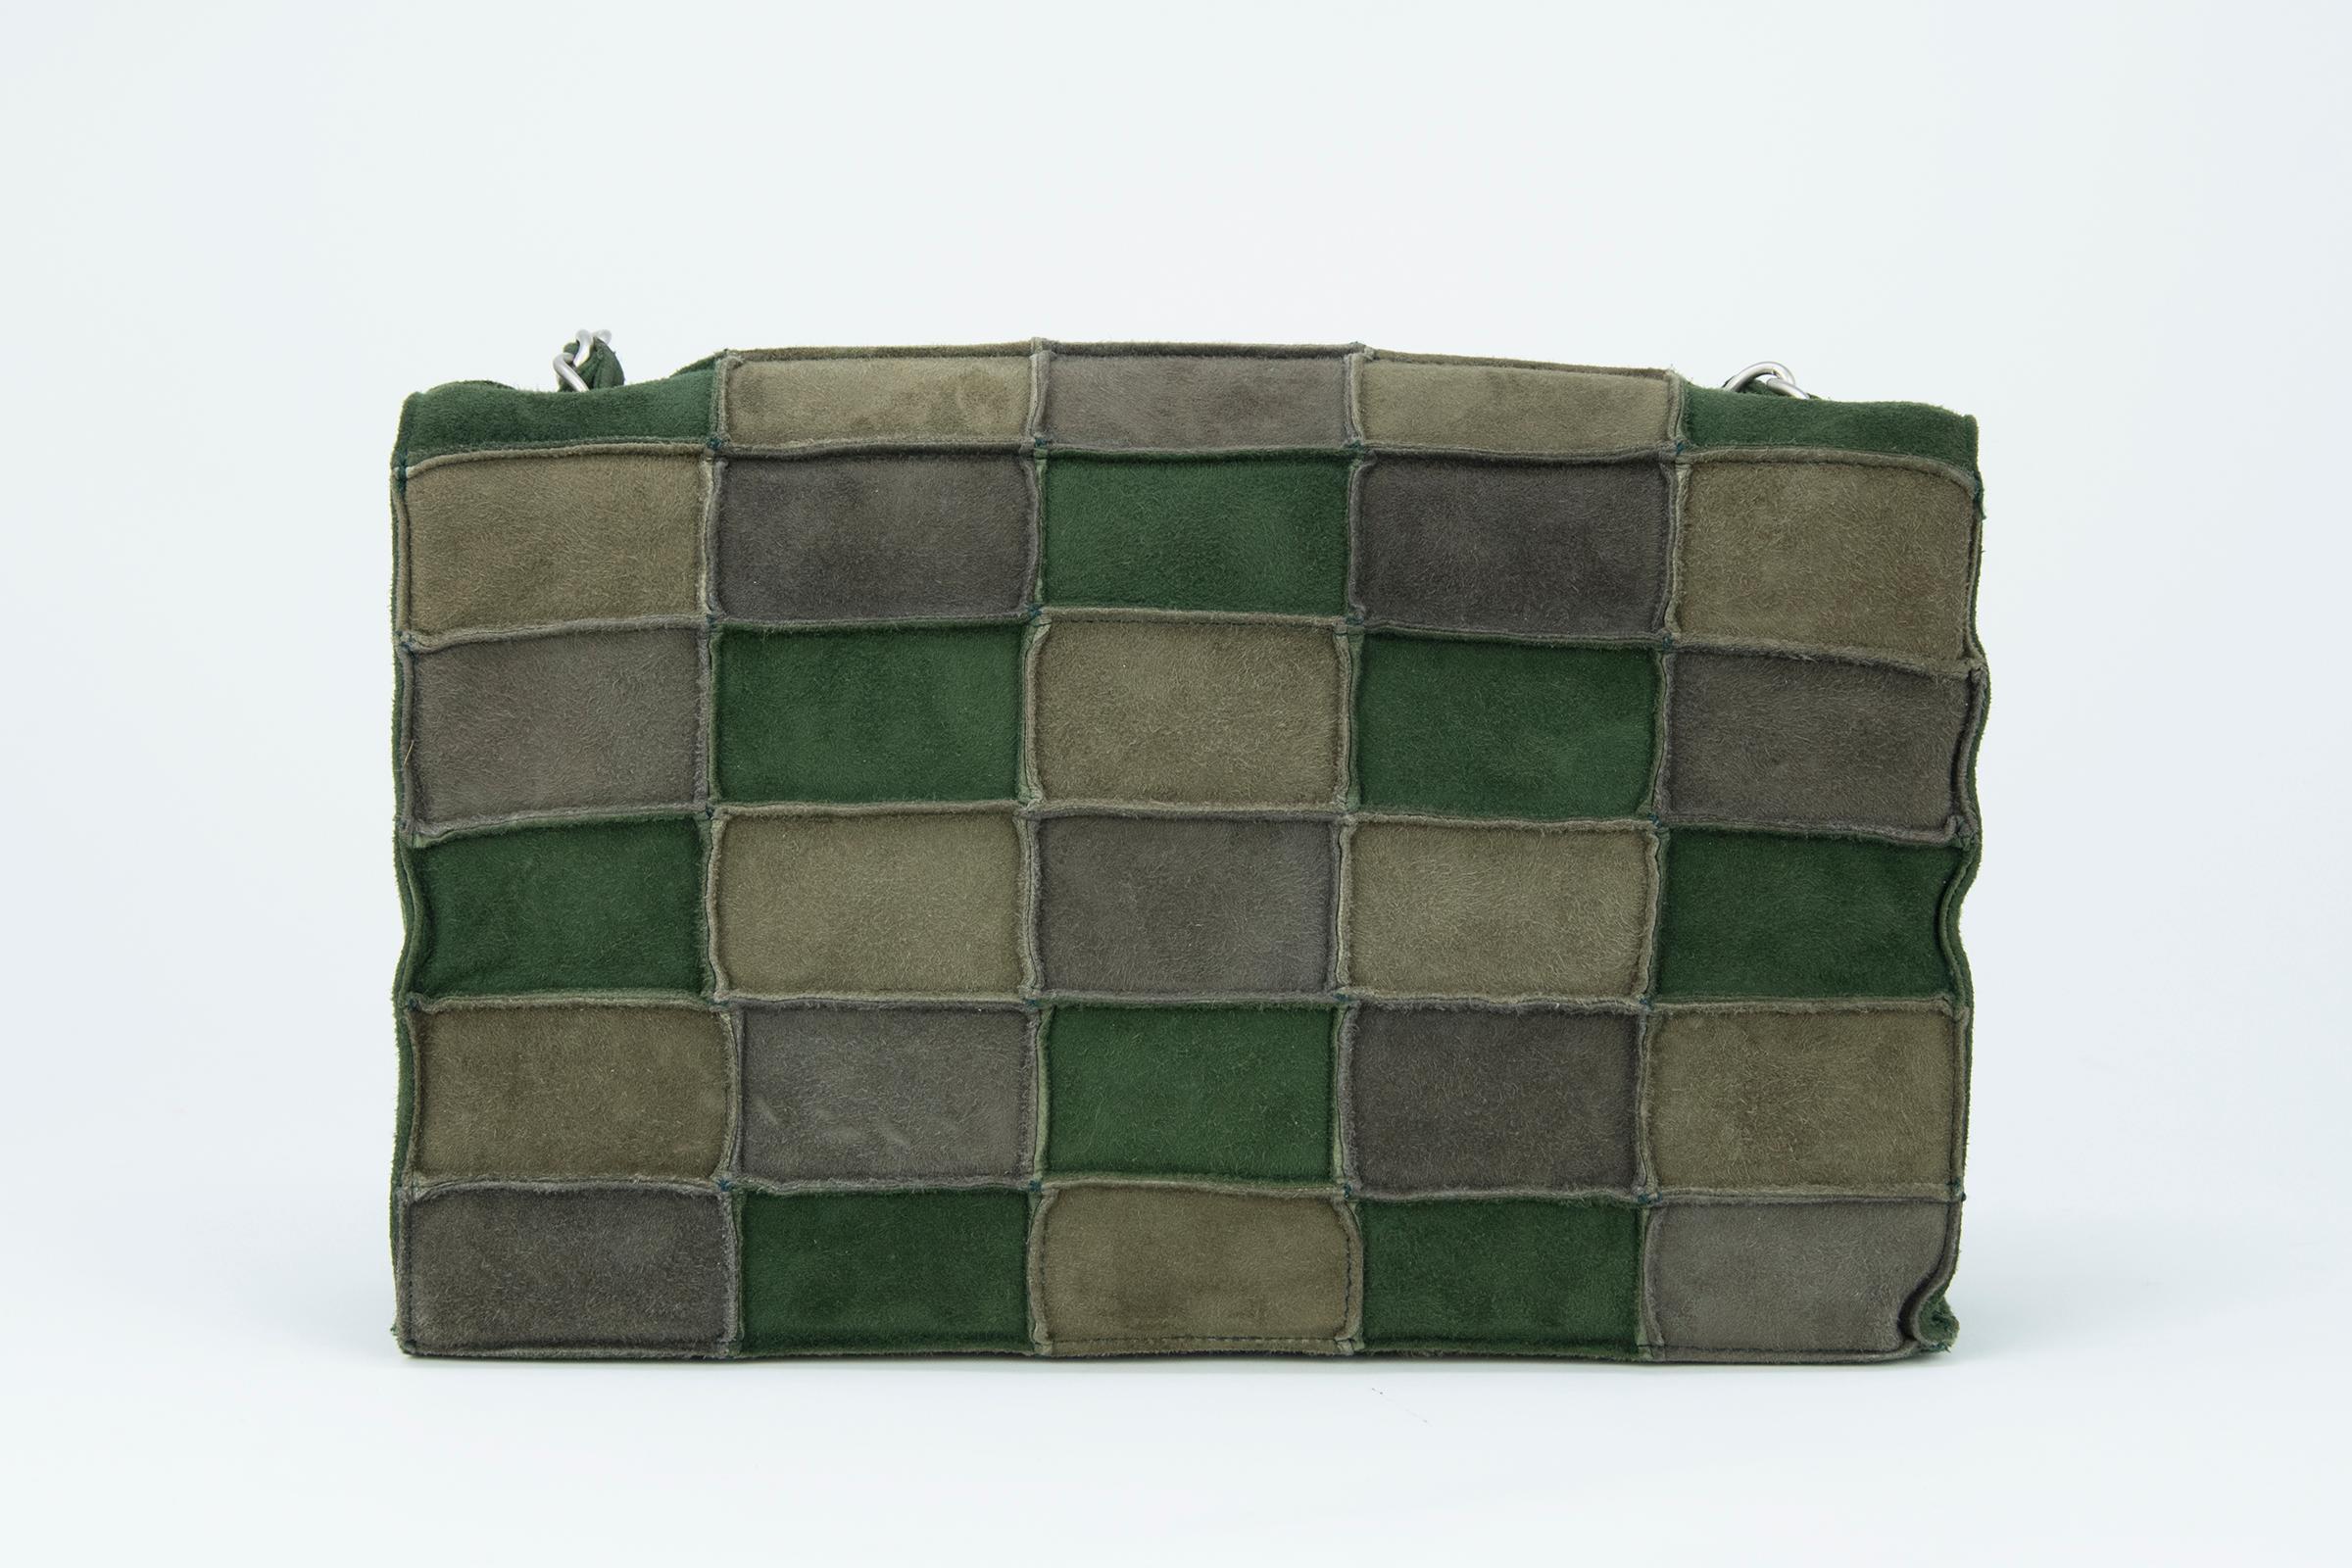 Incredible and unique Chanel medium double flap bag made of green patched suede.  An incredible color palette for fall.  Features silver hardware and a long chain strap.

Condition: New

Dimensions (Approximate): 9.5